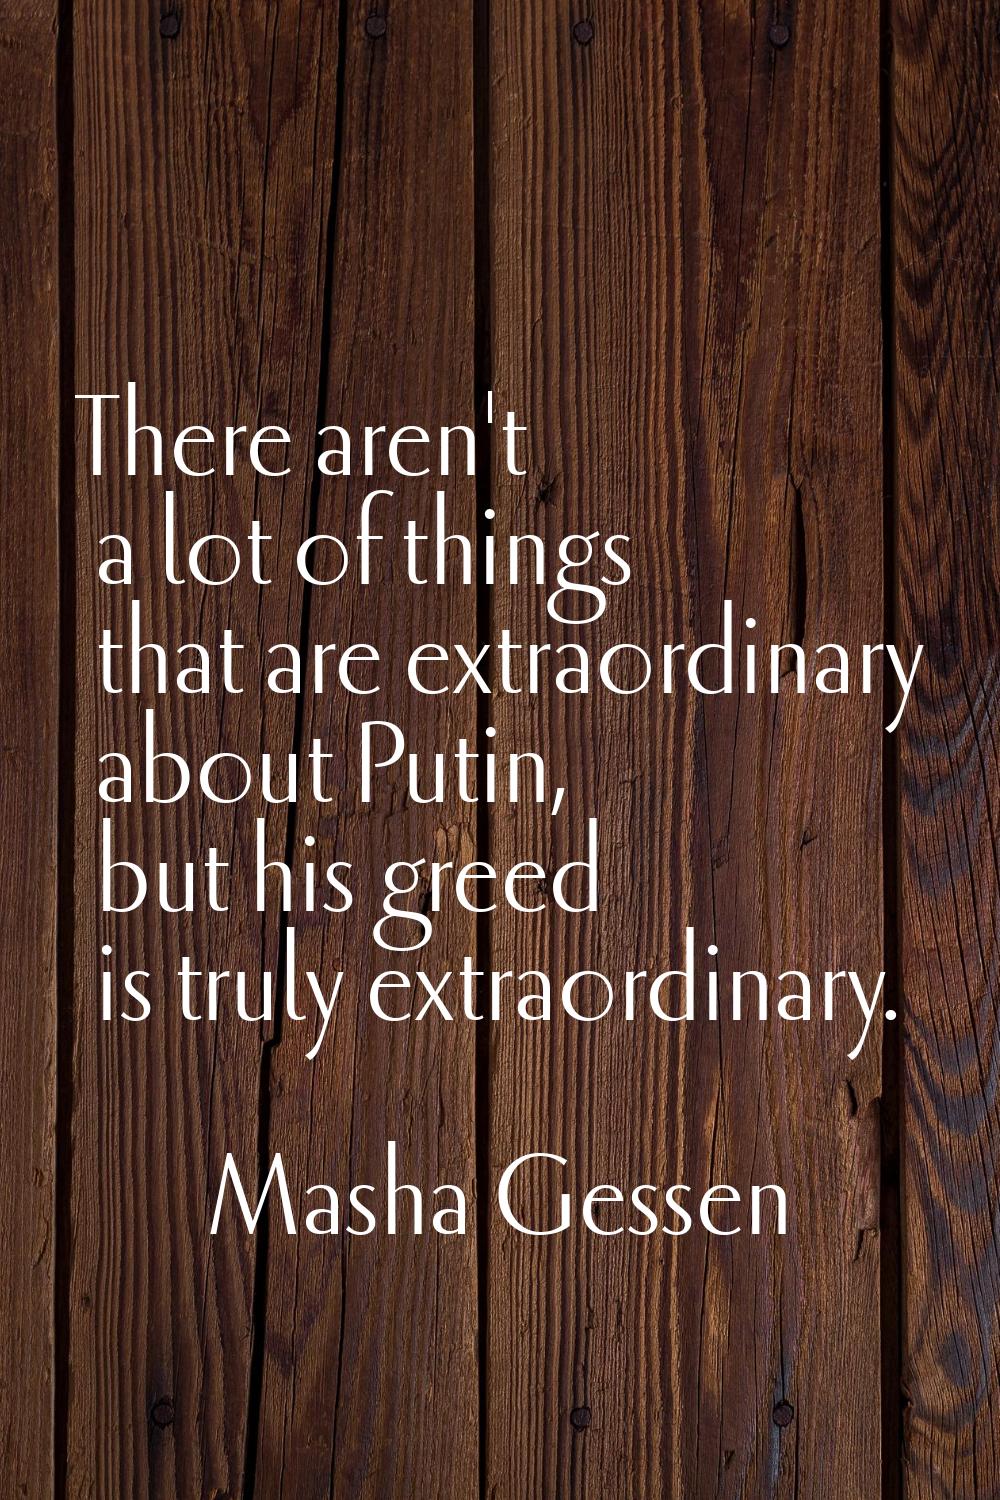 There aren't a lot of things that are extraordinary about Putin, but his greed is truly extraordina